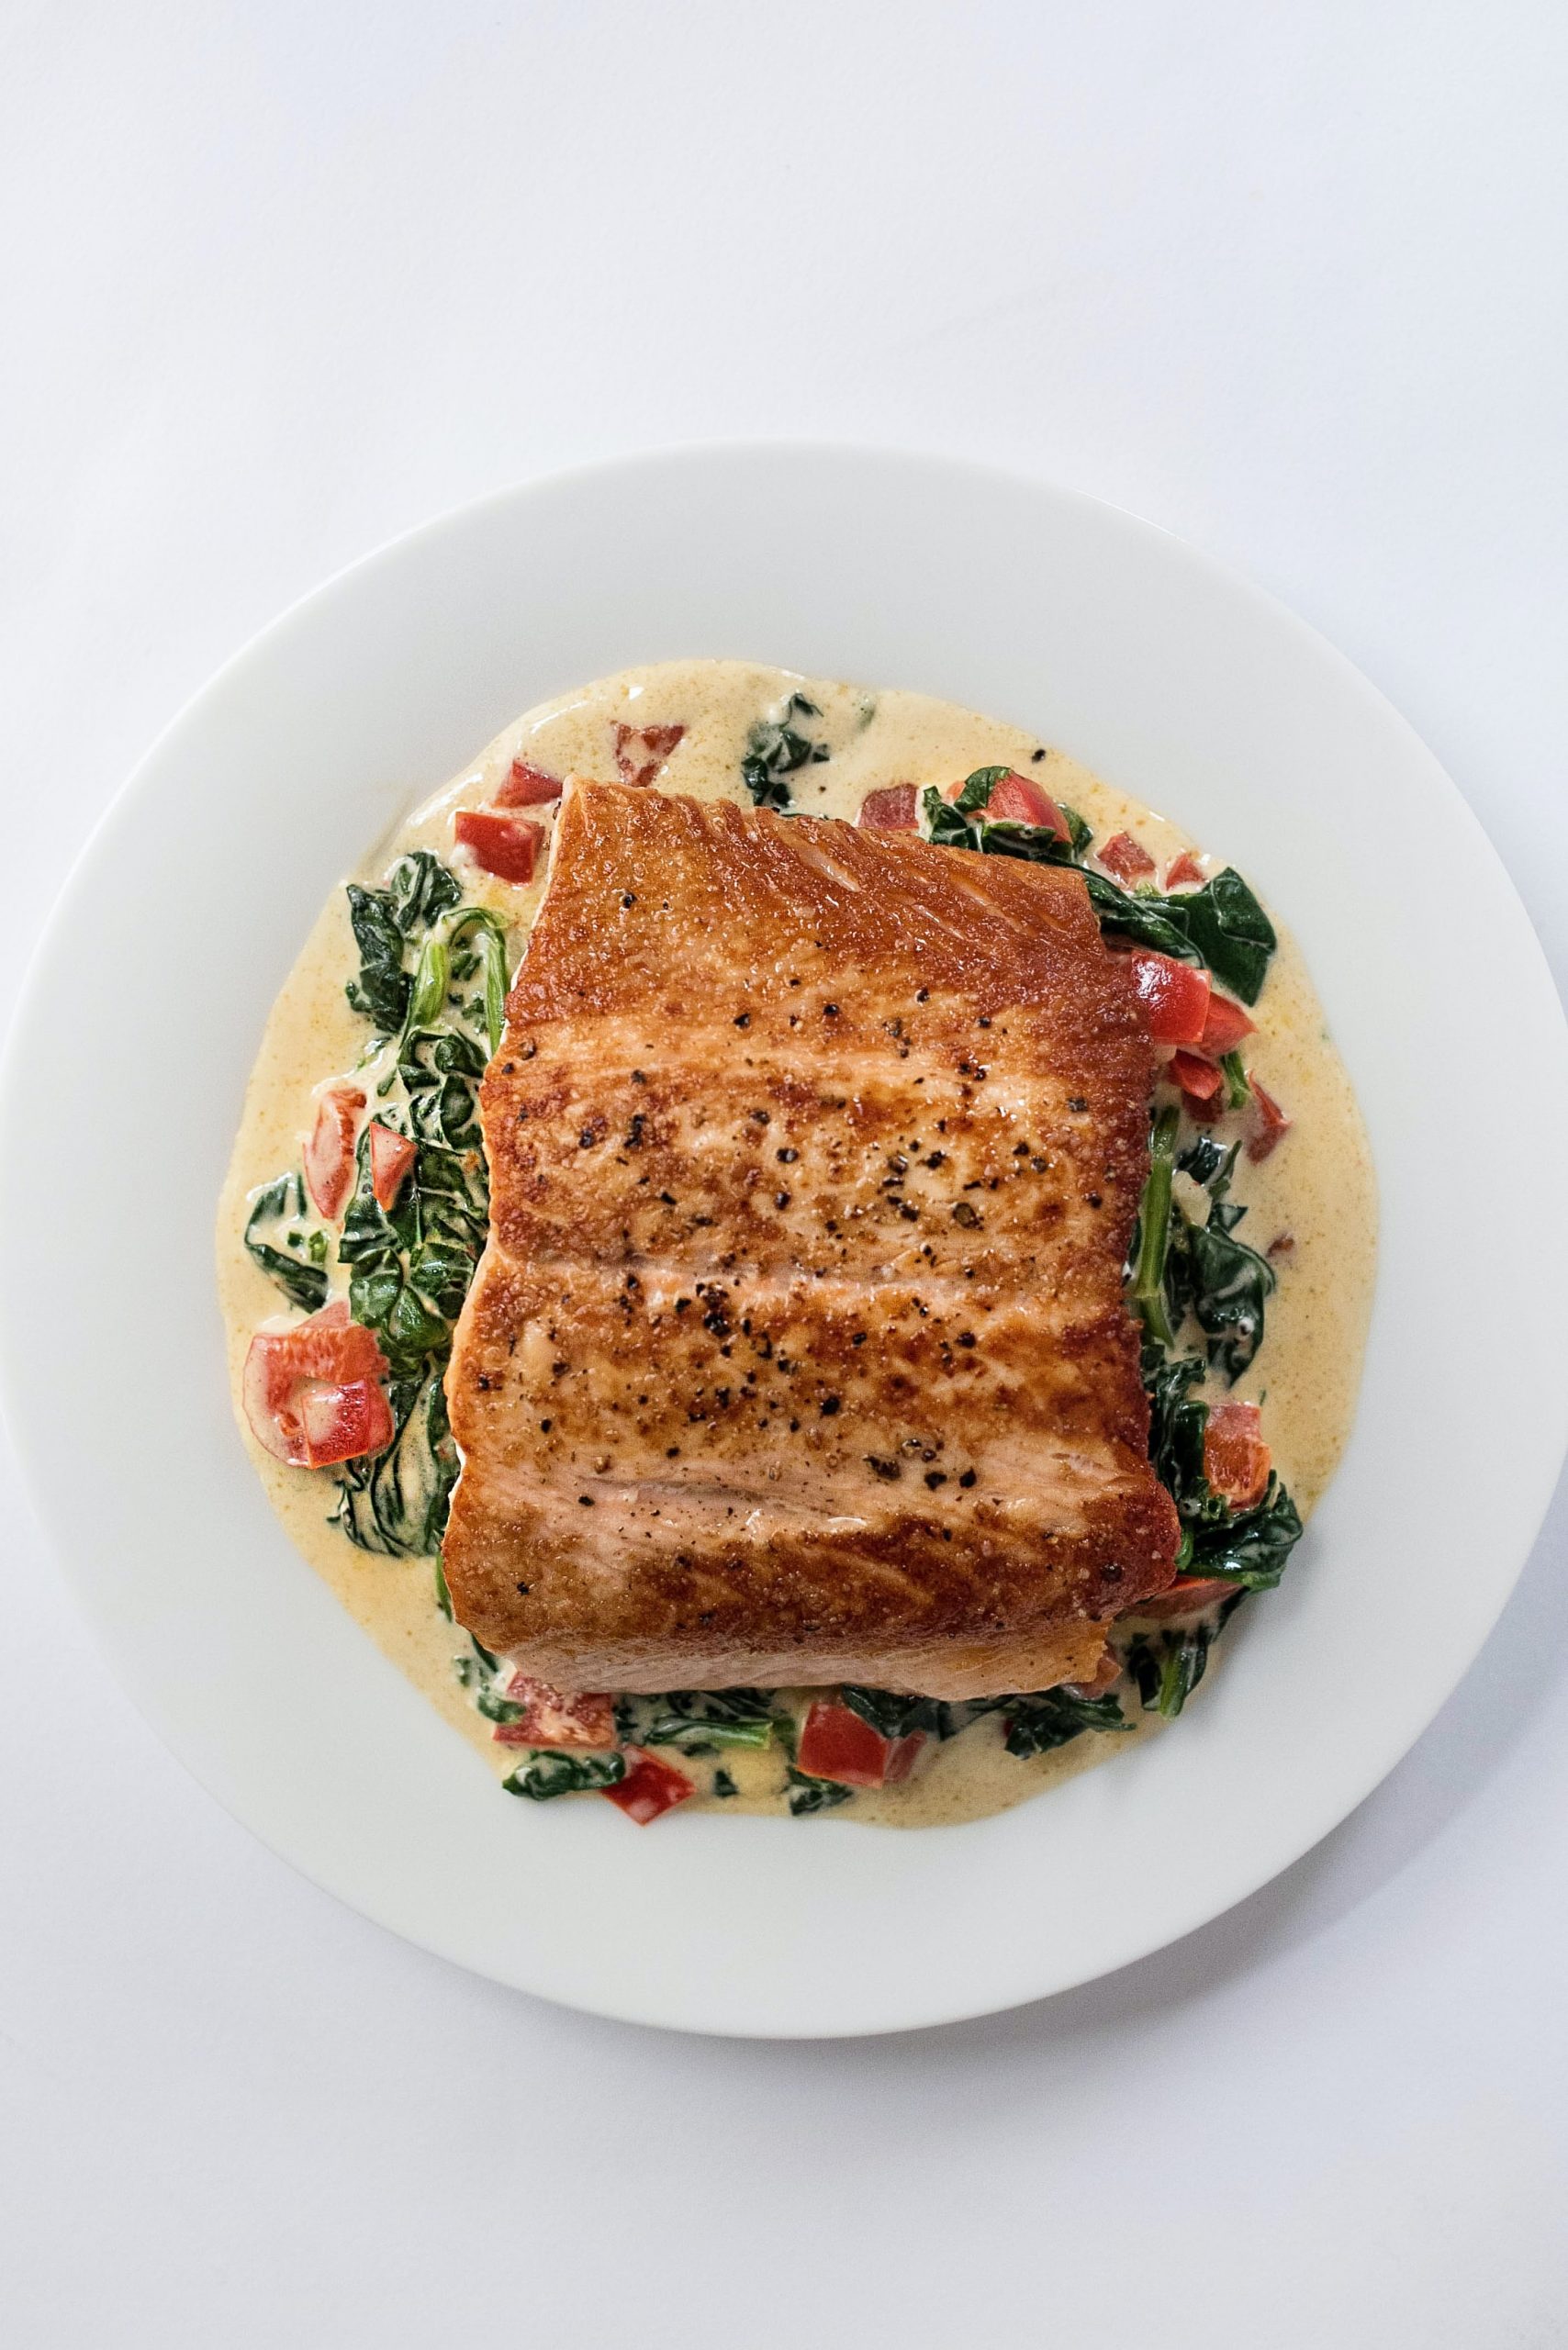 Salmon is a food rich in Omega-3 fatty acids